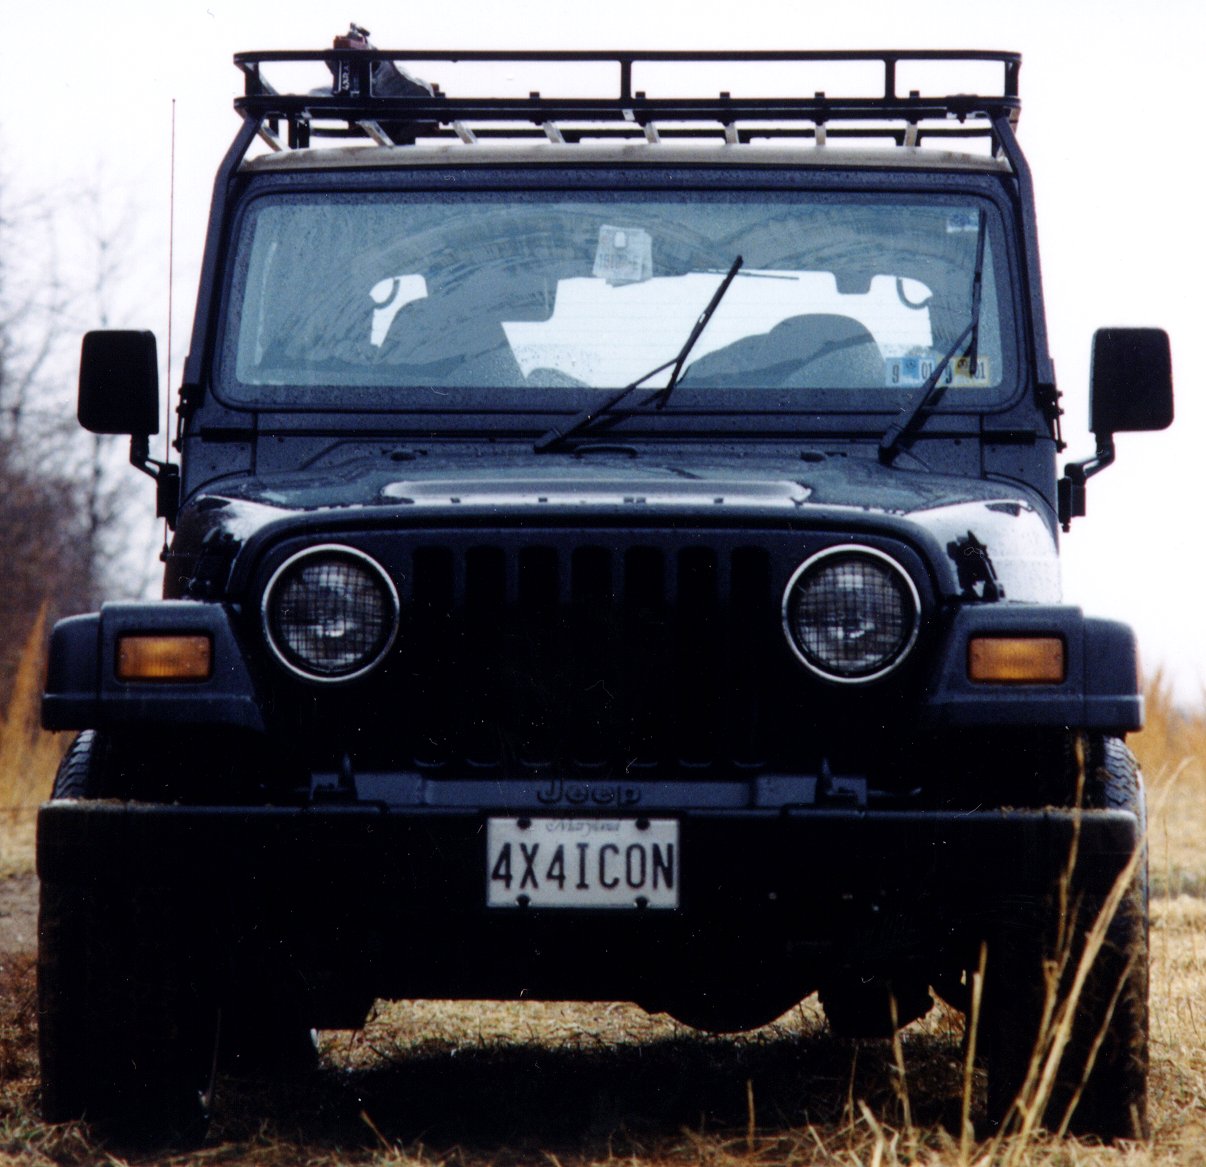 1999 Jeep Wrangler Sport - Click here to see what modifications I've made so far...